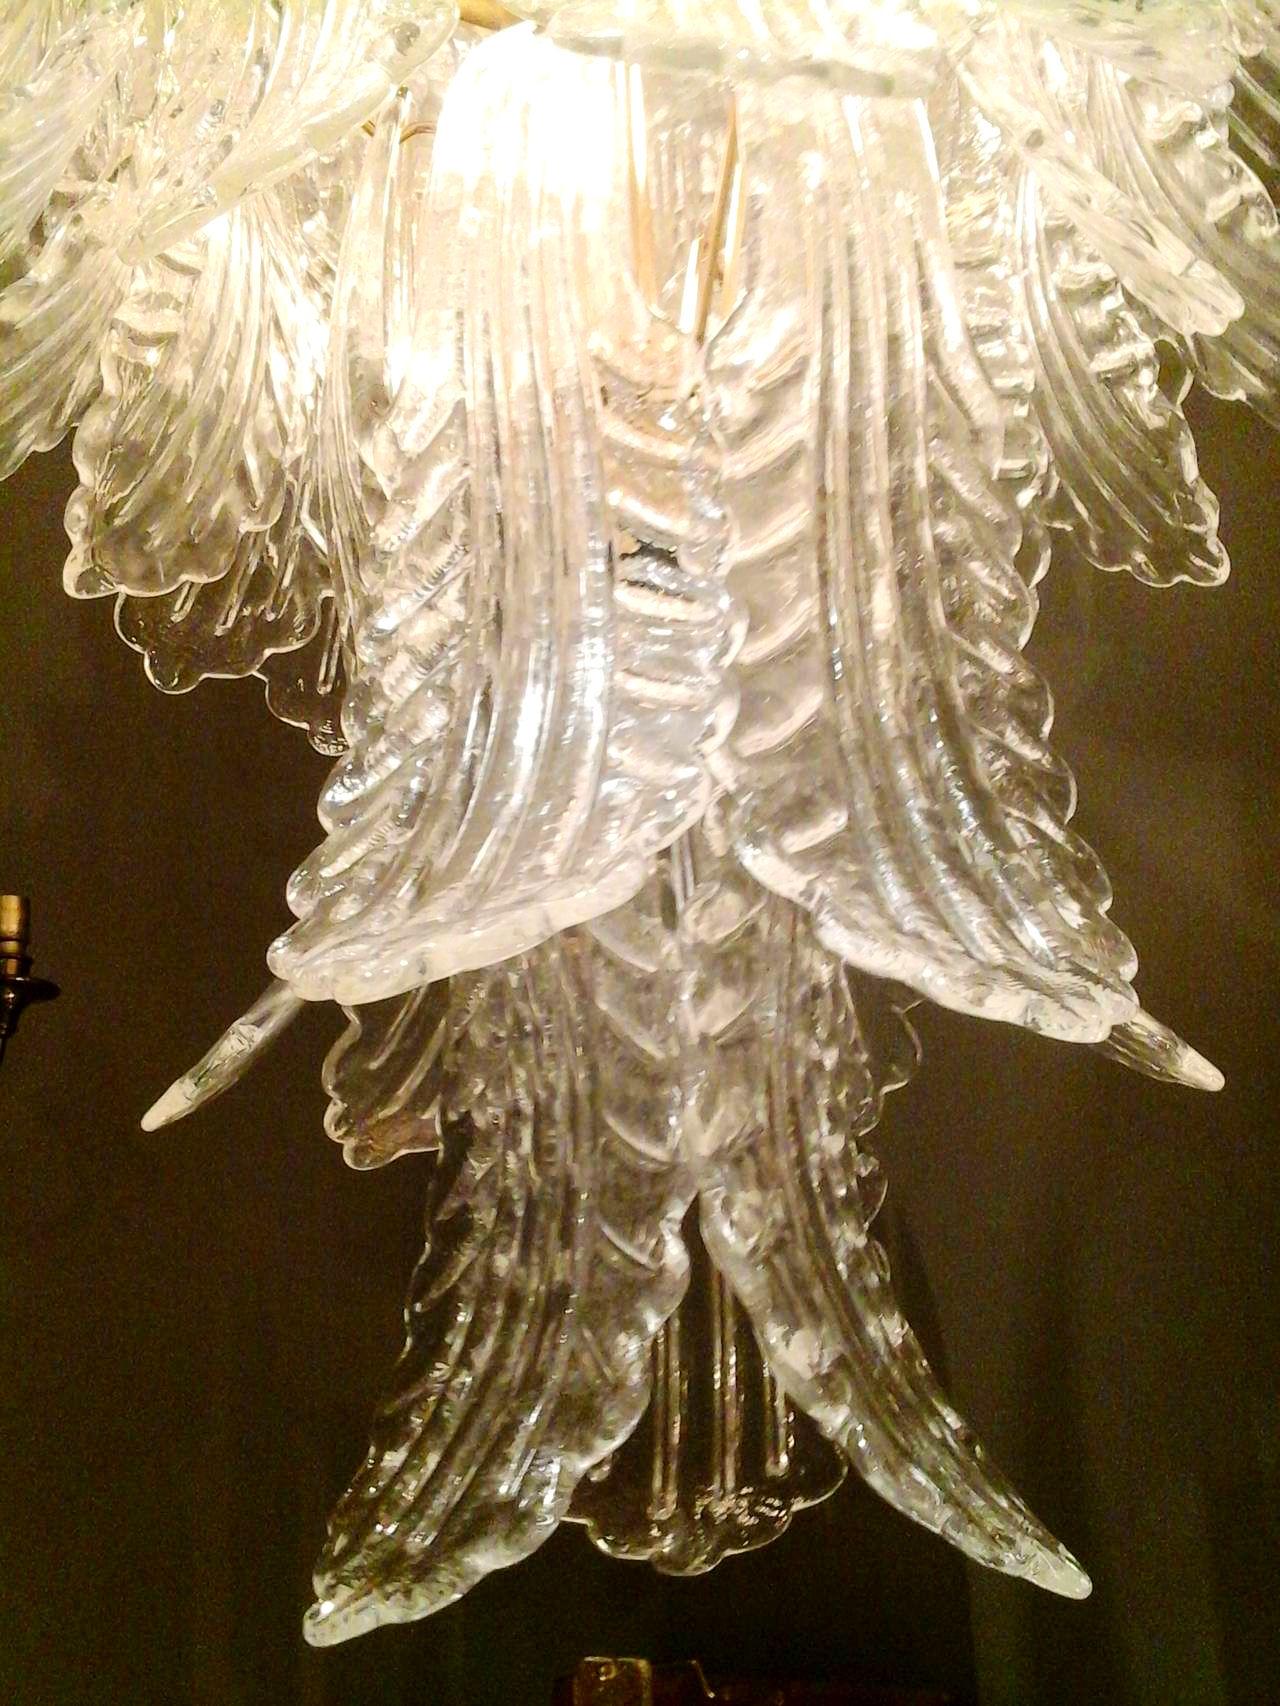 Mid-20th Century Extra Large Clear Murano Glass Mid-Century Modern Chandelier, Barovier style